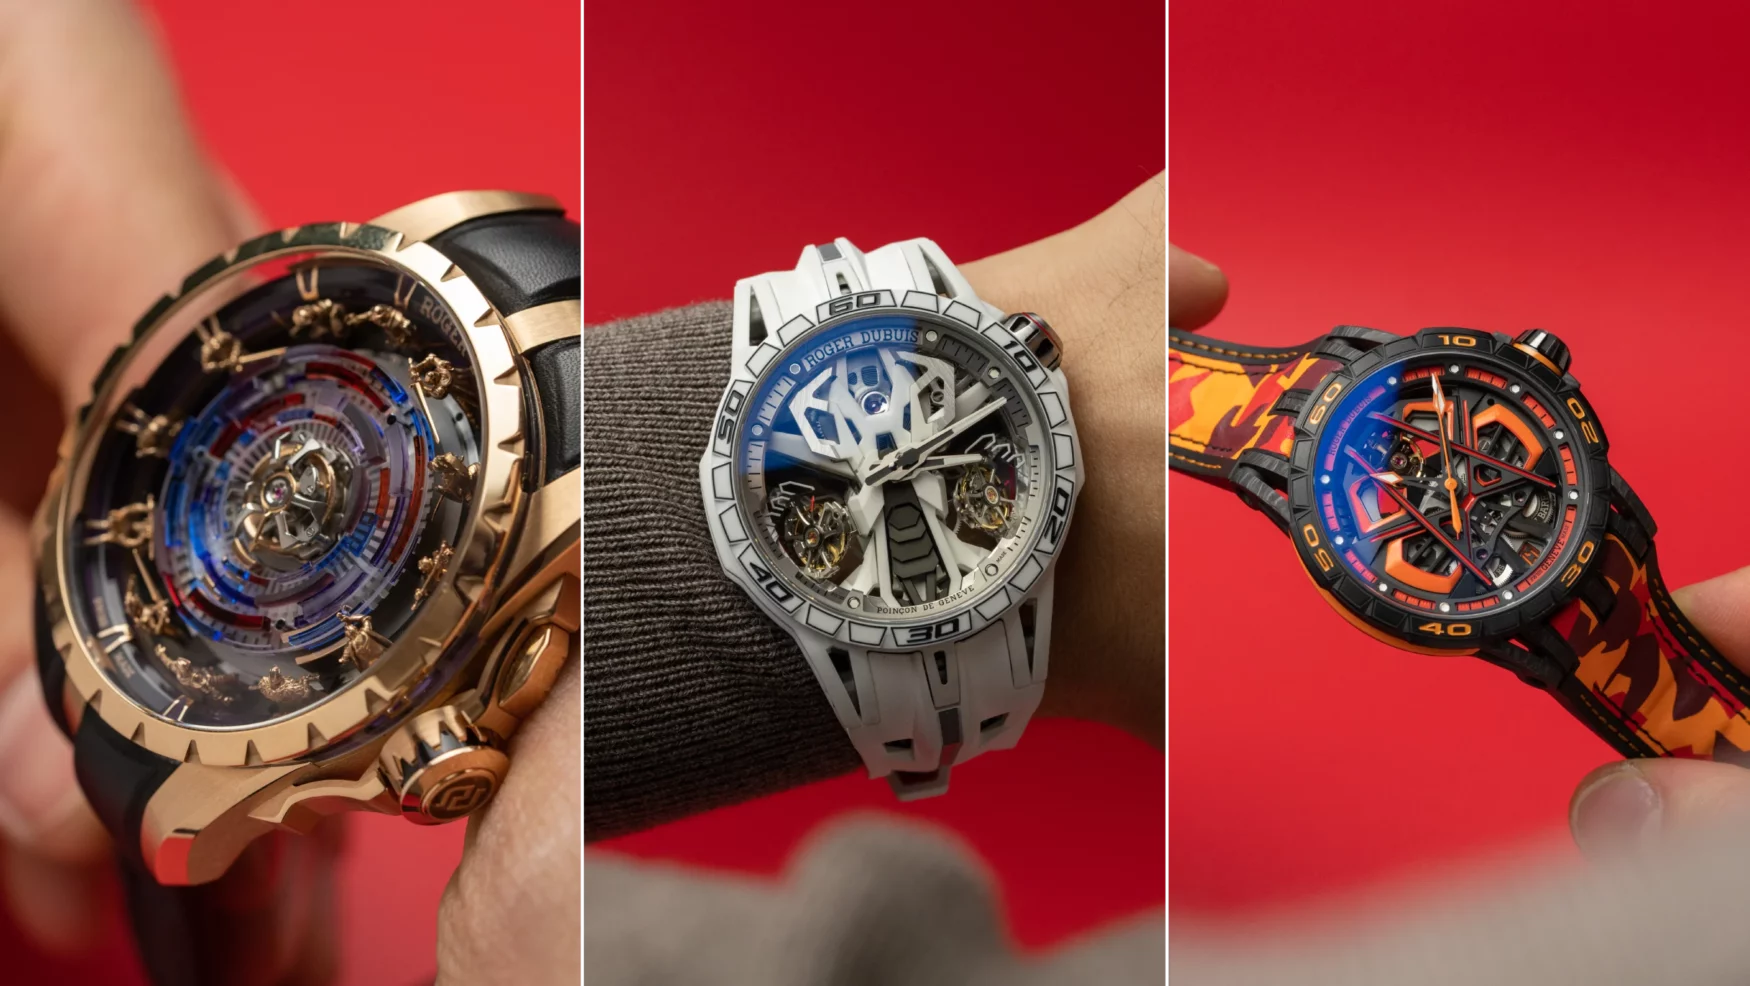 Roger Dubuis CEO Nicola Andreatta on the concept of Hyper Horology and expecting the unexpected